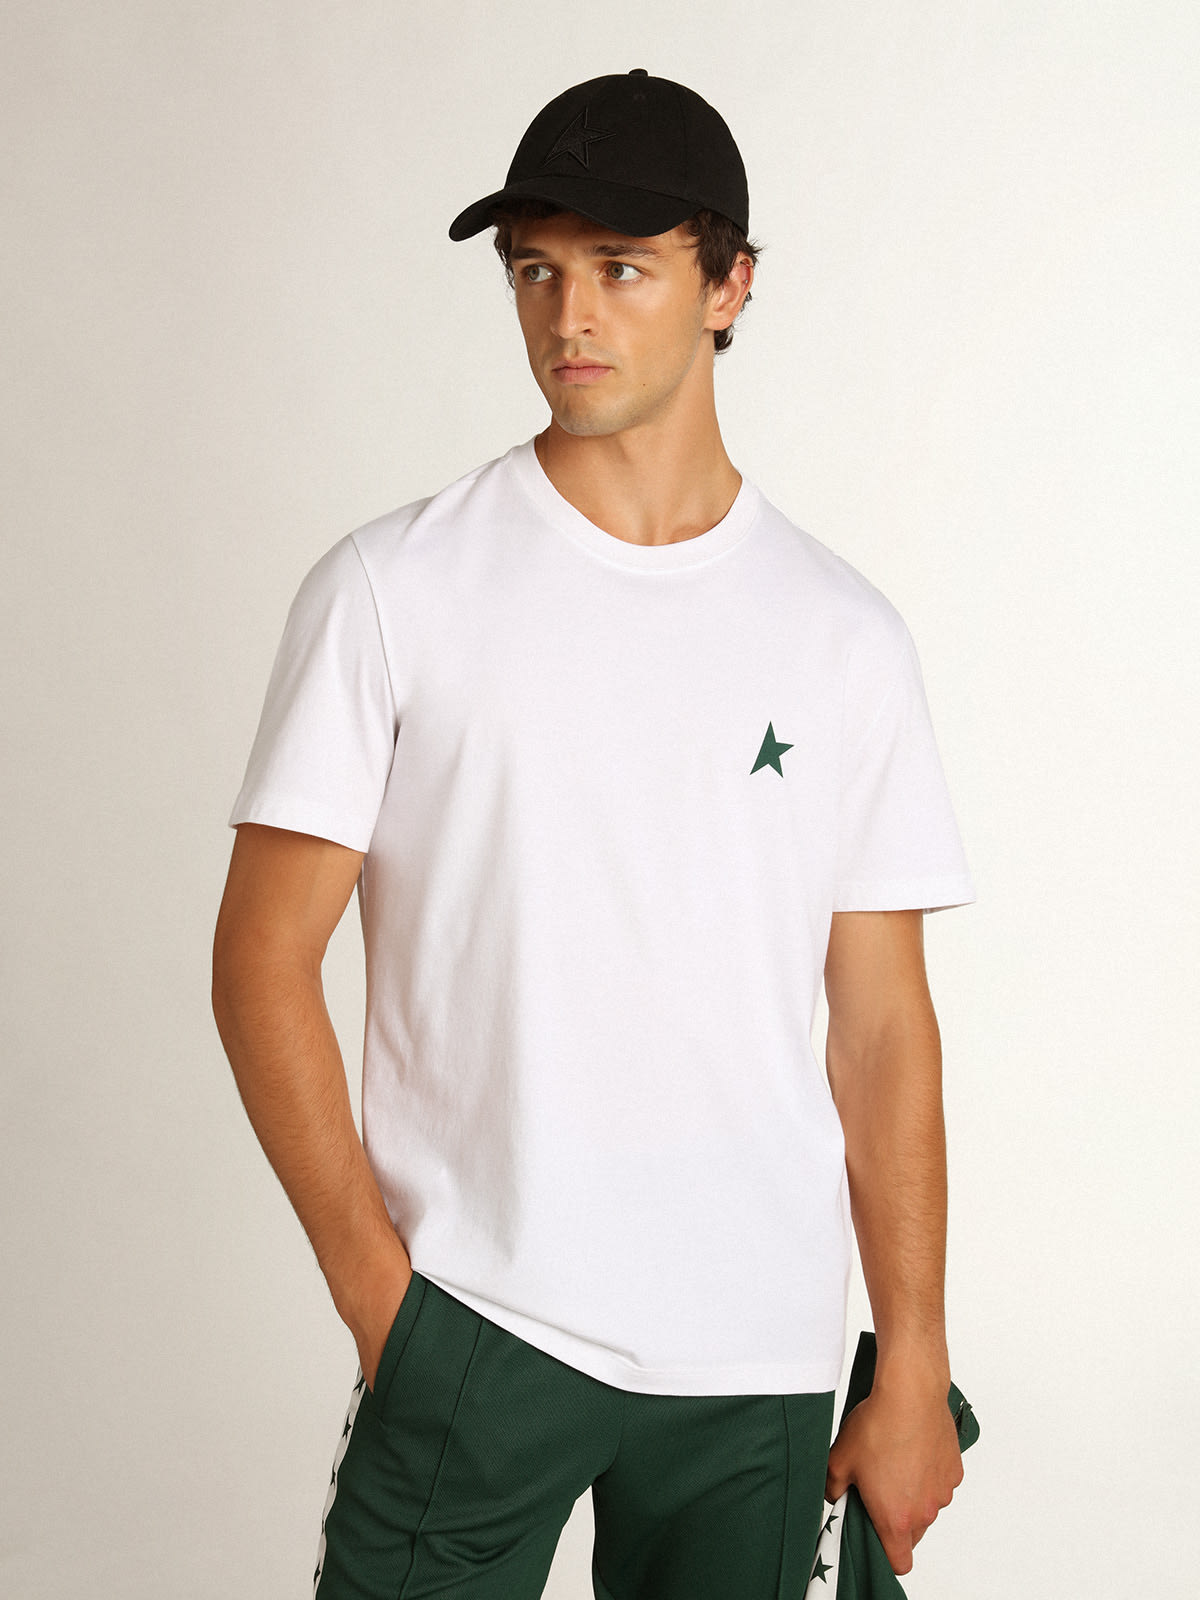 Golden Goose - White Star Collection T-shirt with contrasting green star on the front in 